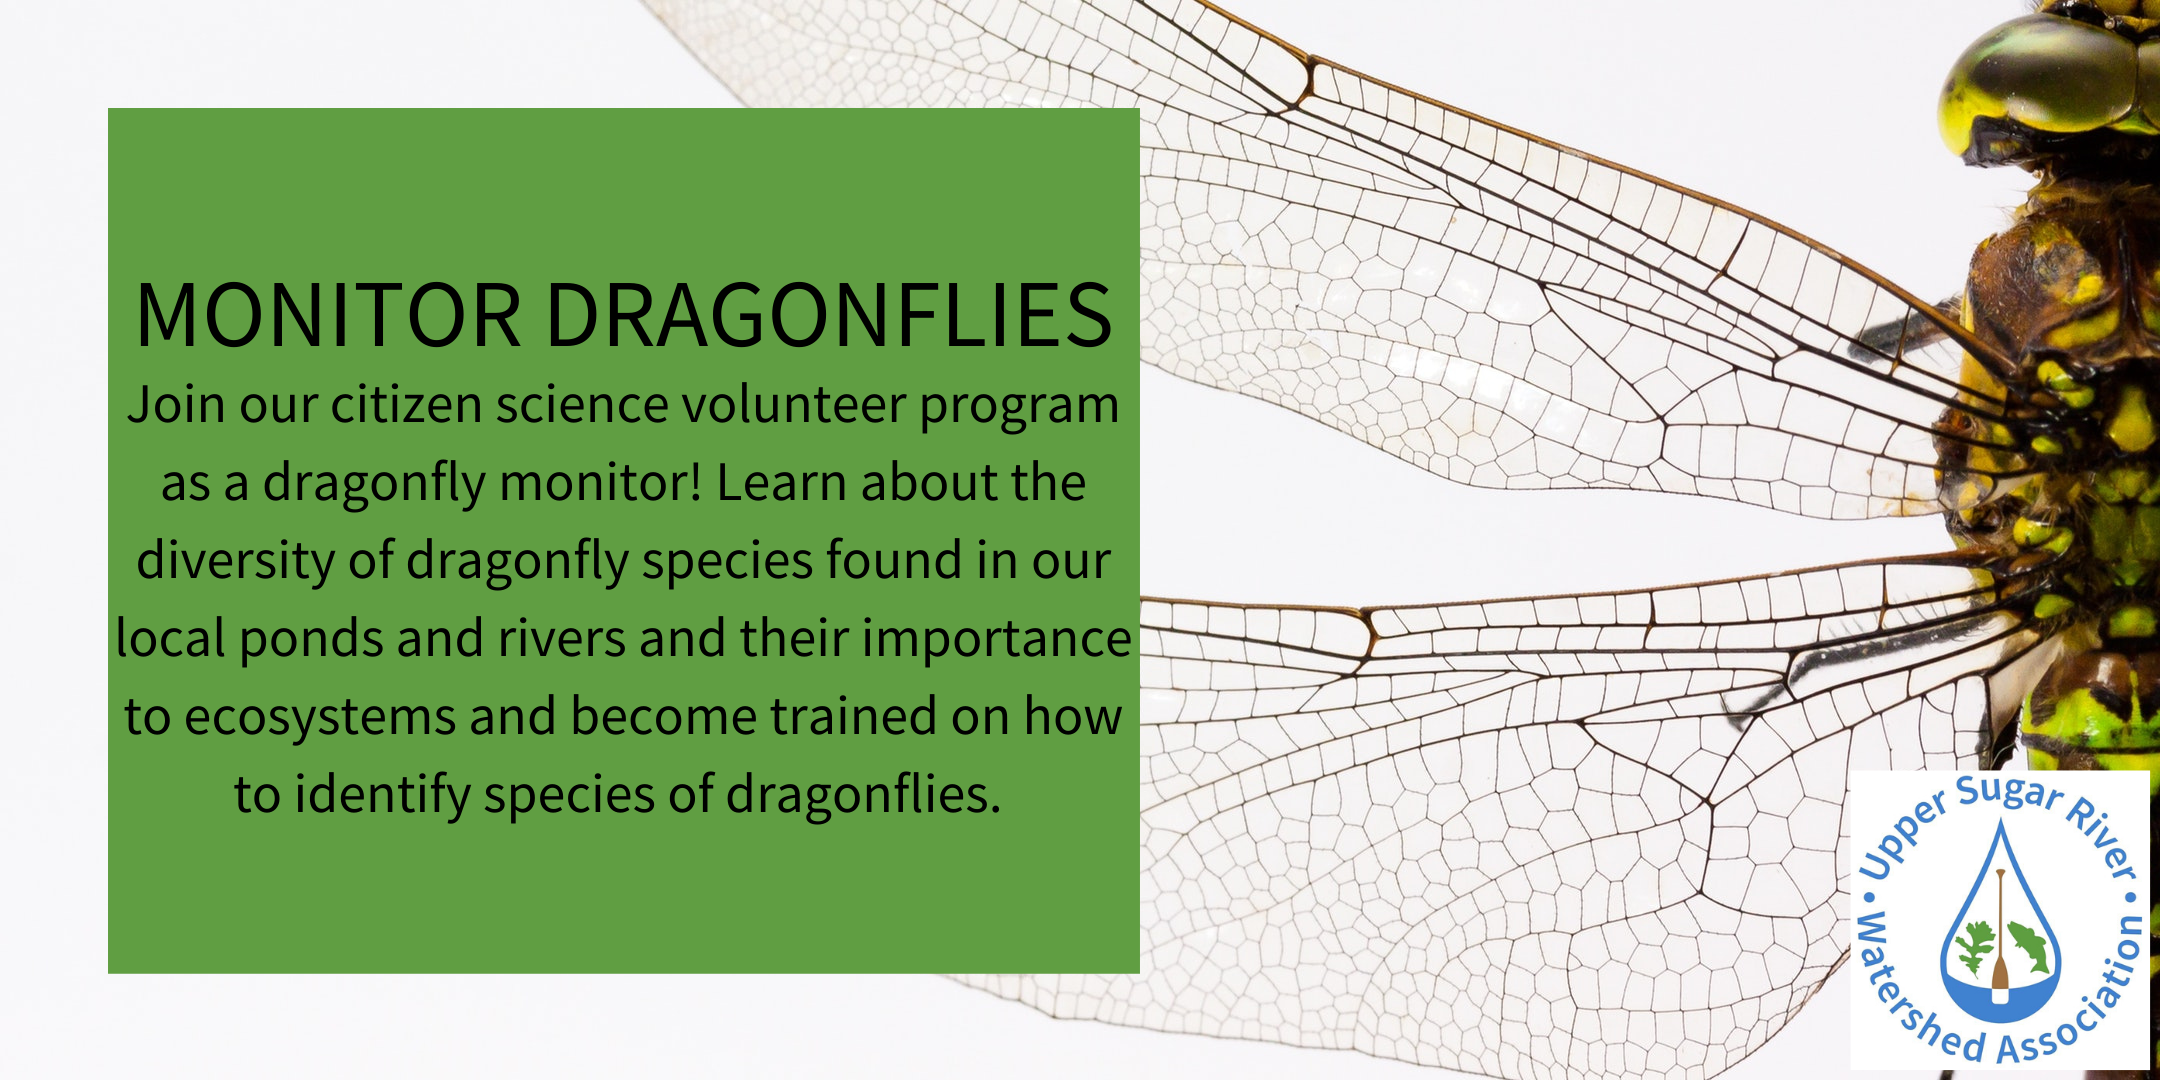 Become a Trained Dragonfly Monitor